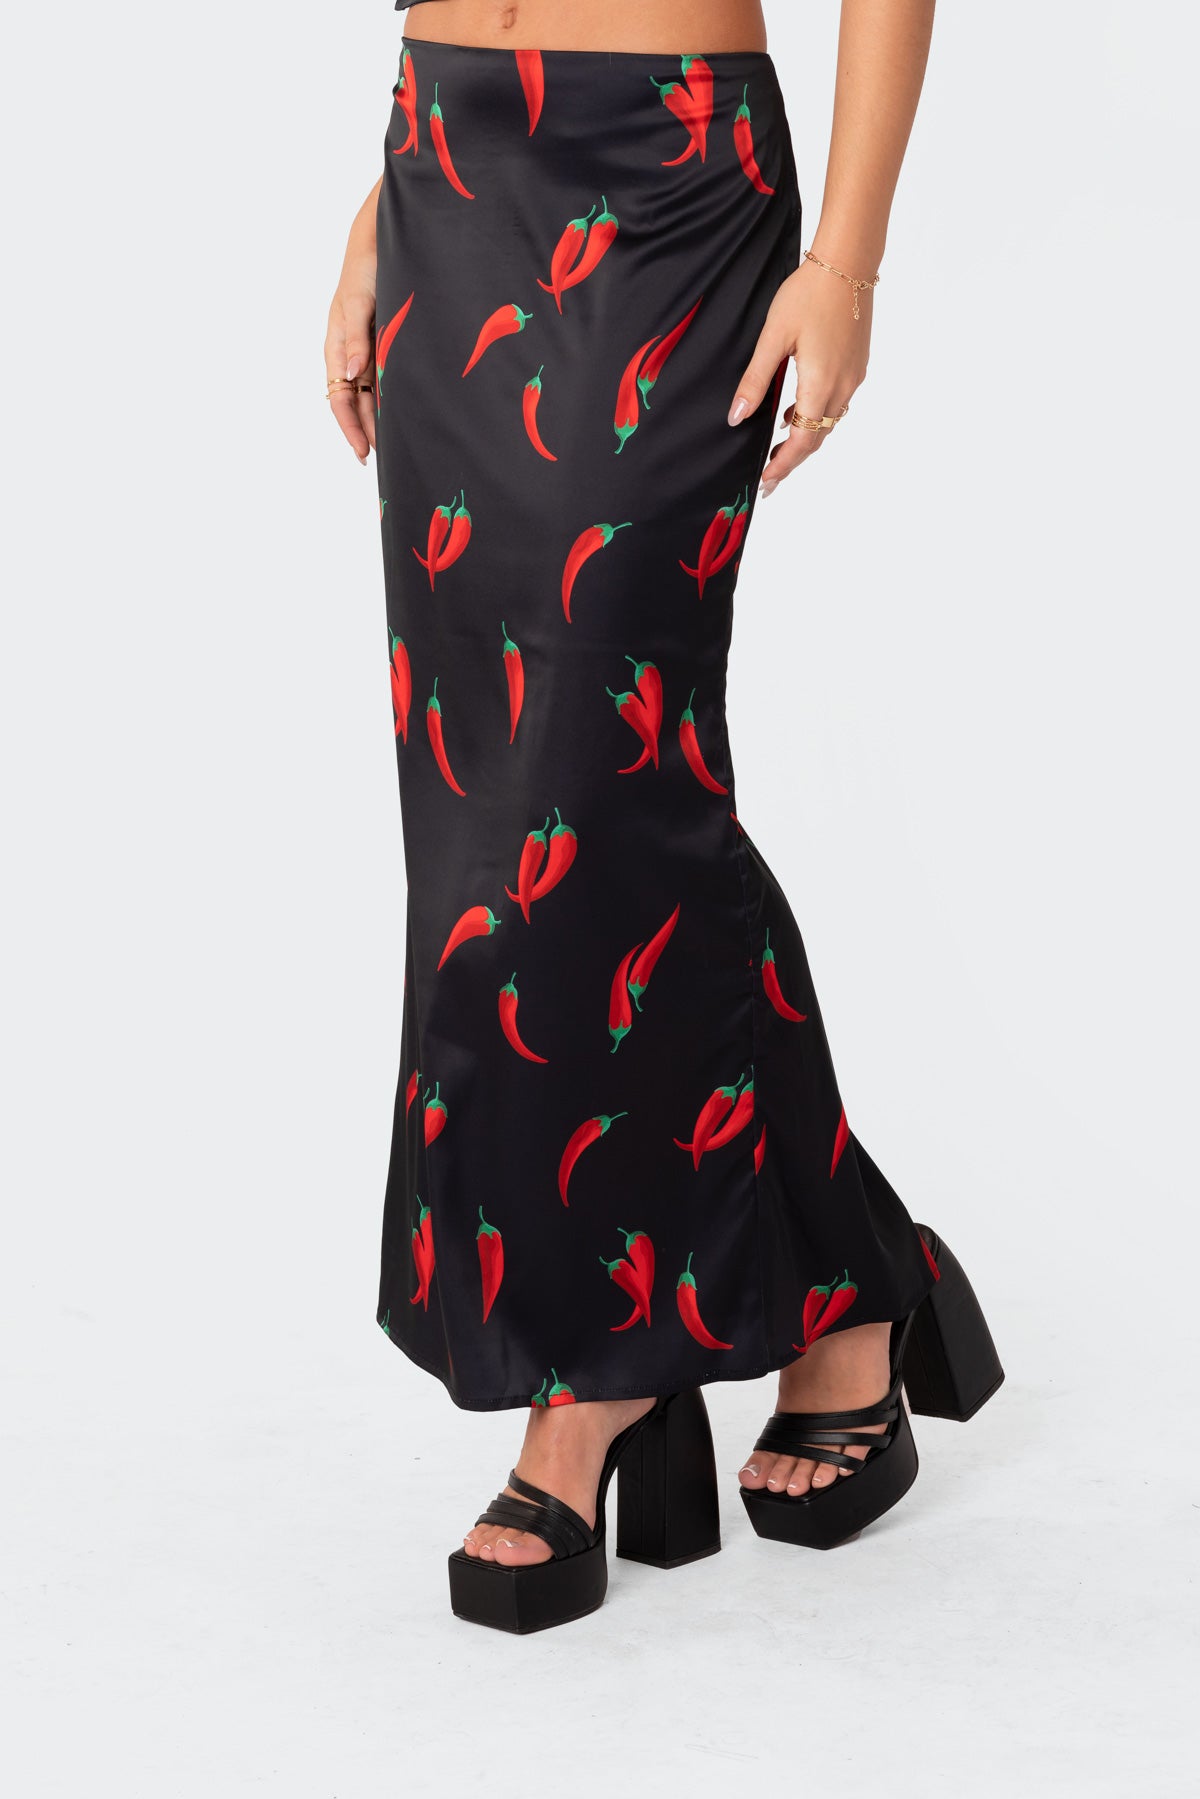 Chili Satin Low Rise Back Slitted Maxi Skirt